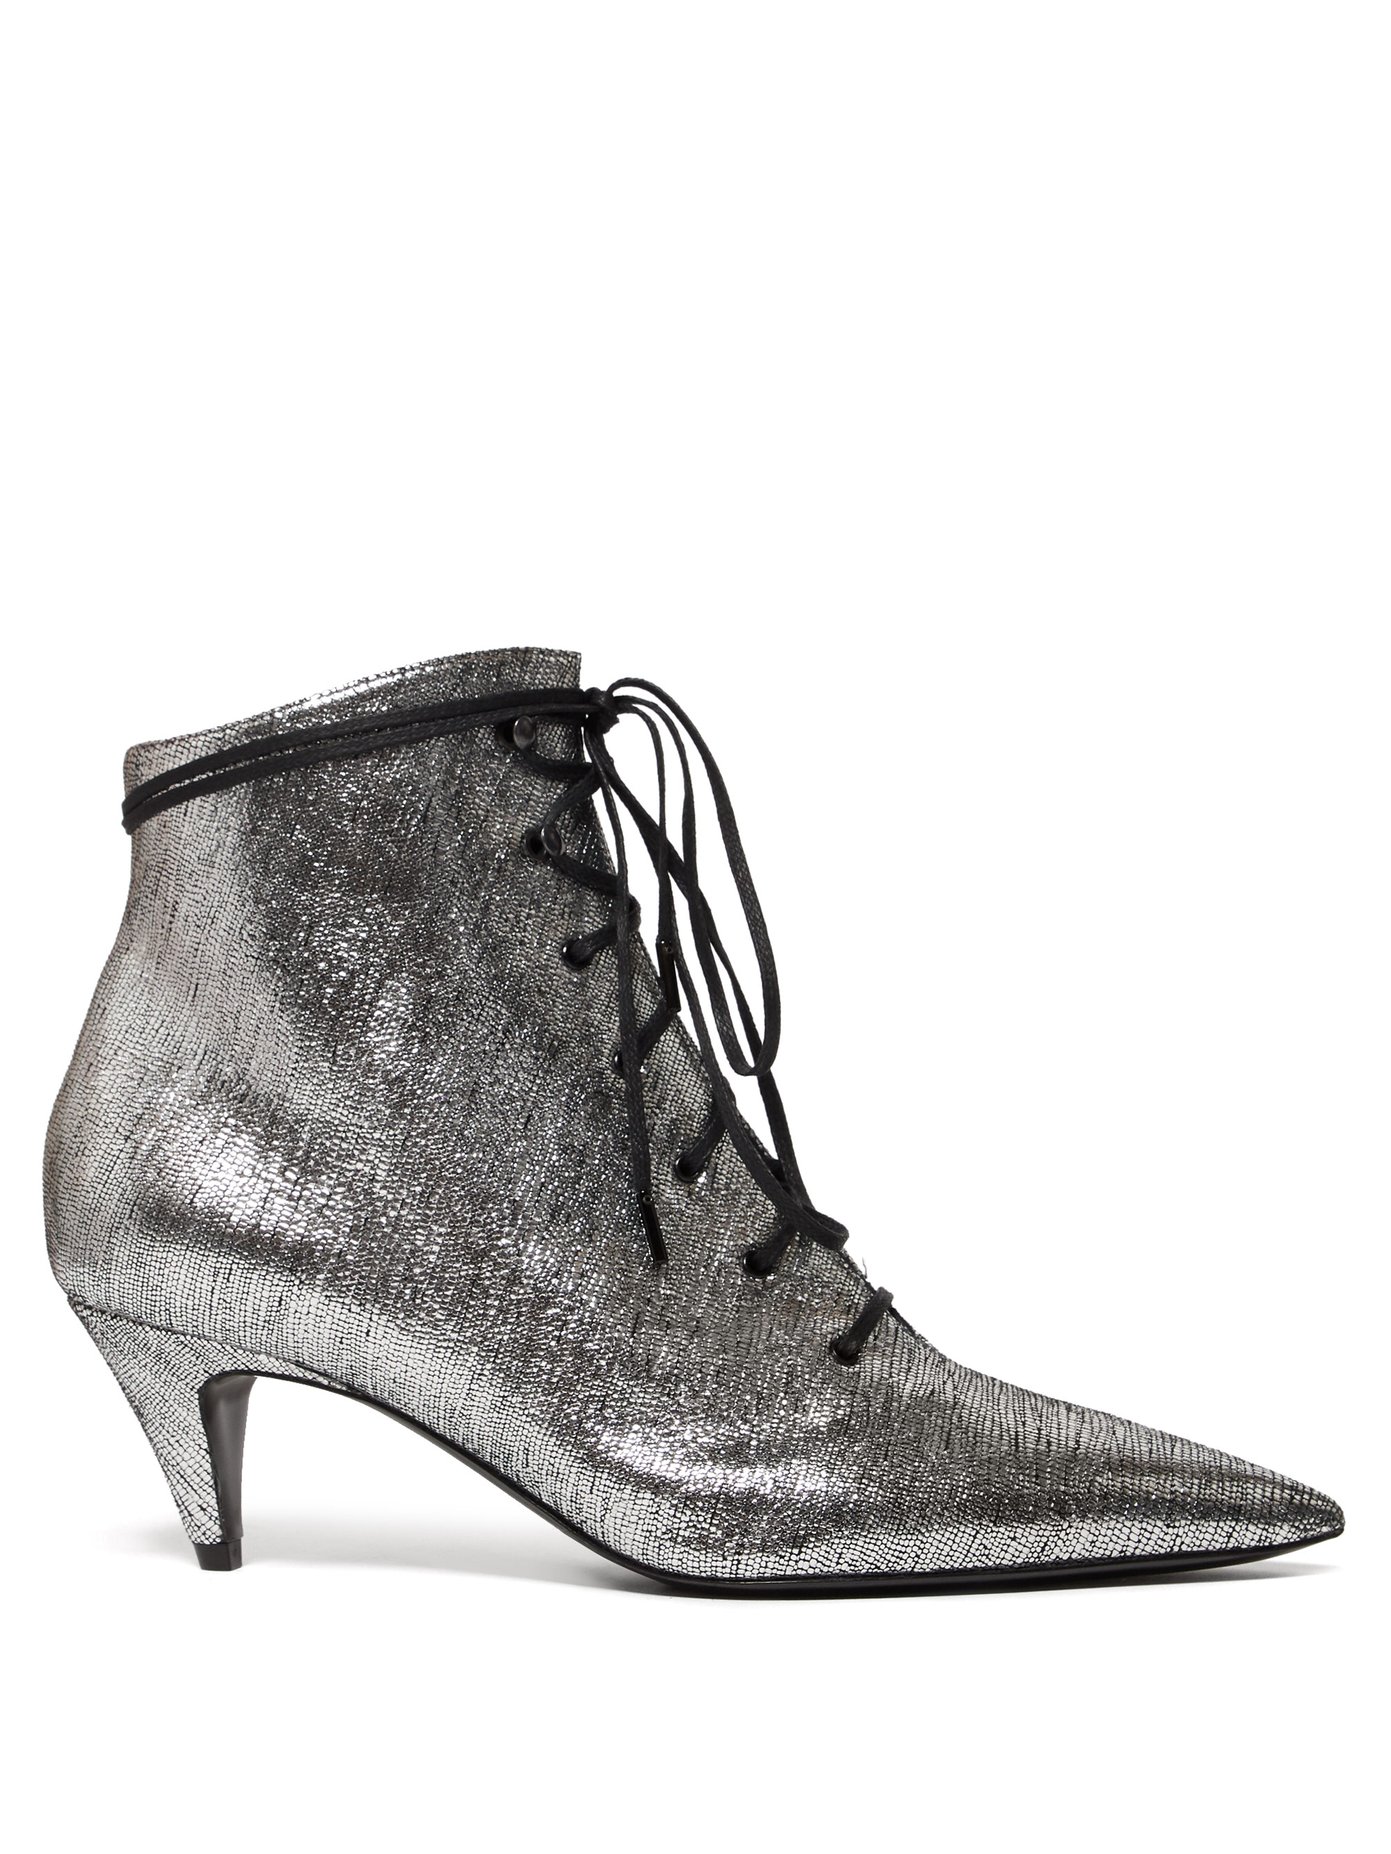 metallic lace up boots